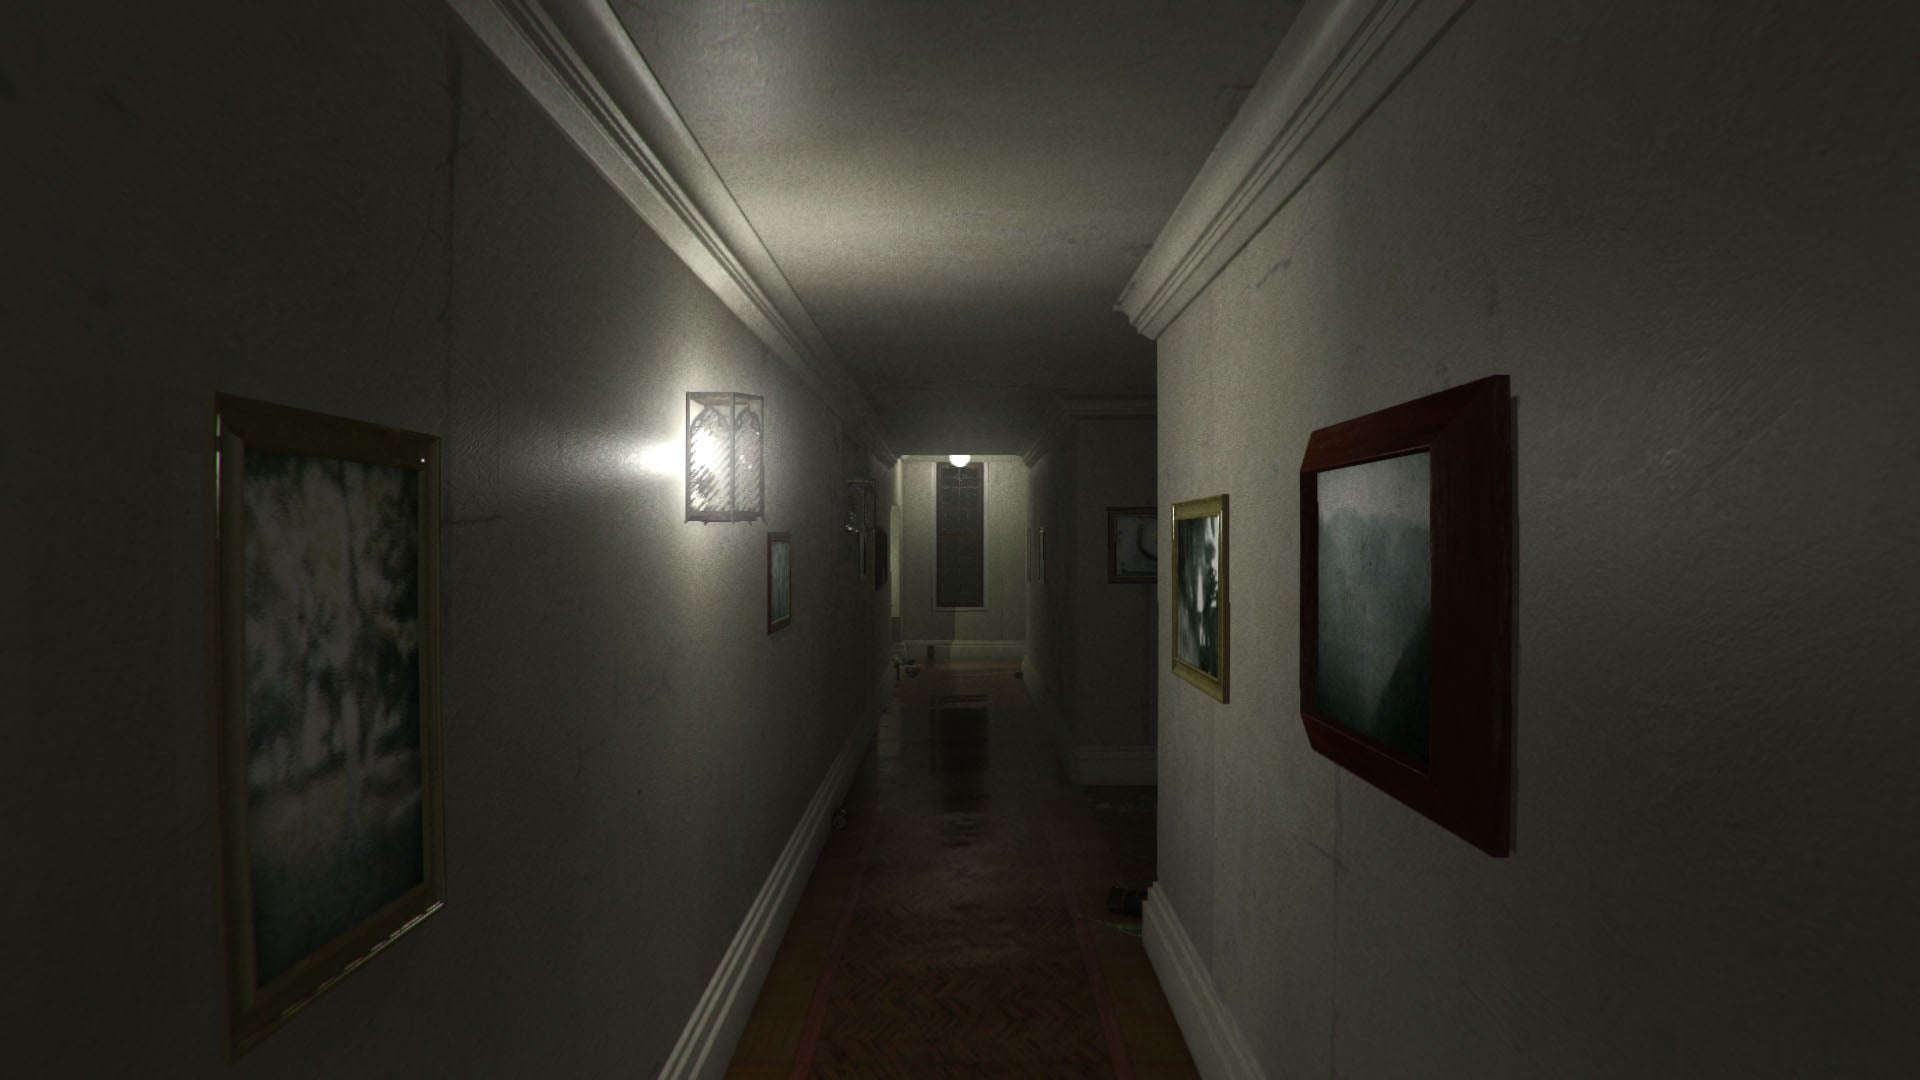 Image for For those who missed out on the P.T. demo PuniTy is as close as it gets